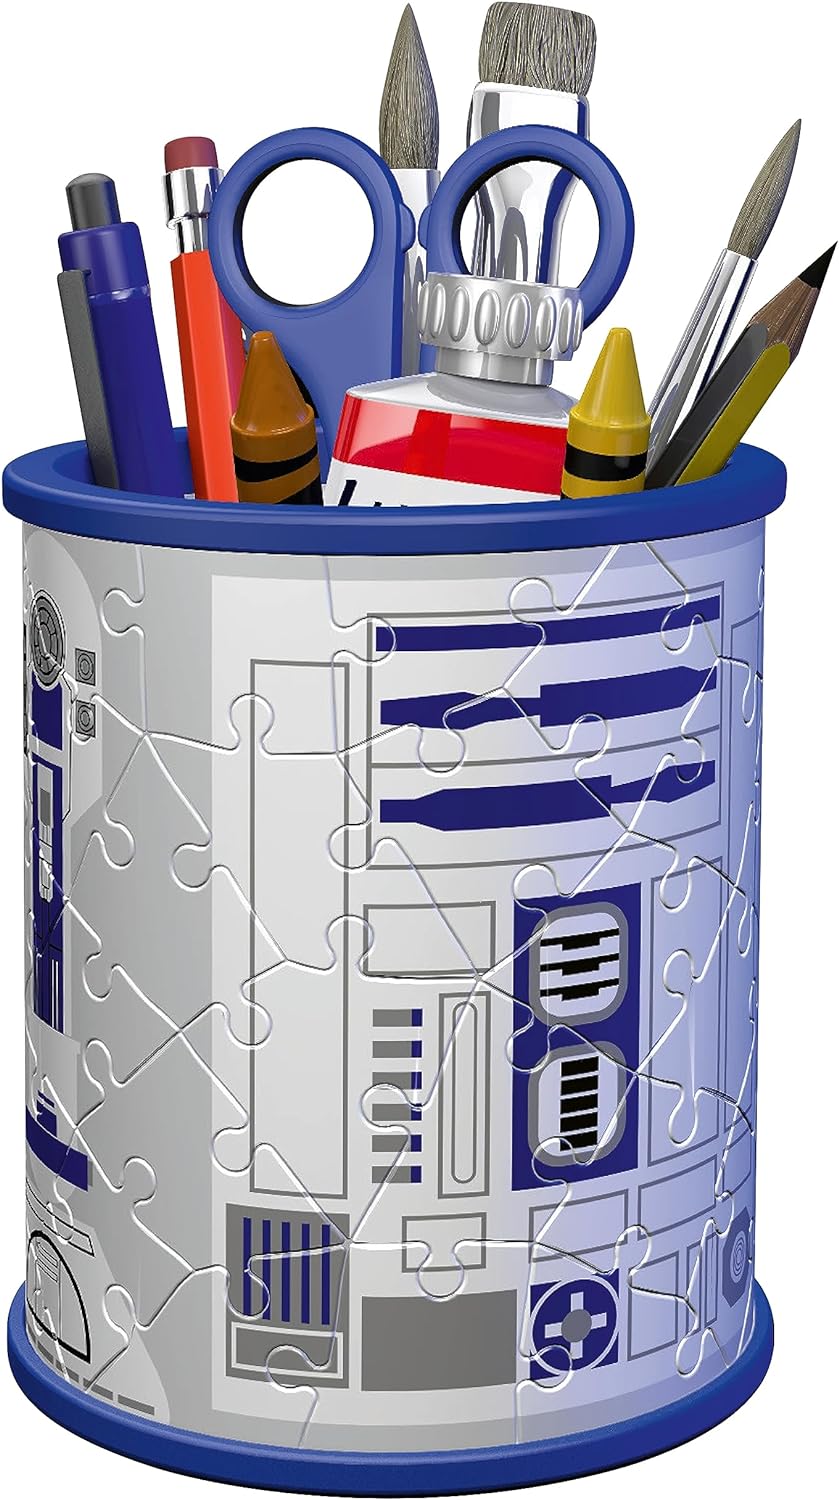 Ravensburger 11554 Star Wars R2-D2 3D Jigsaw Puzzle for Kids and Adults